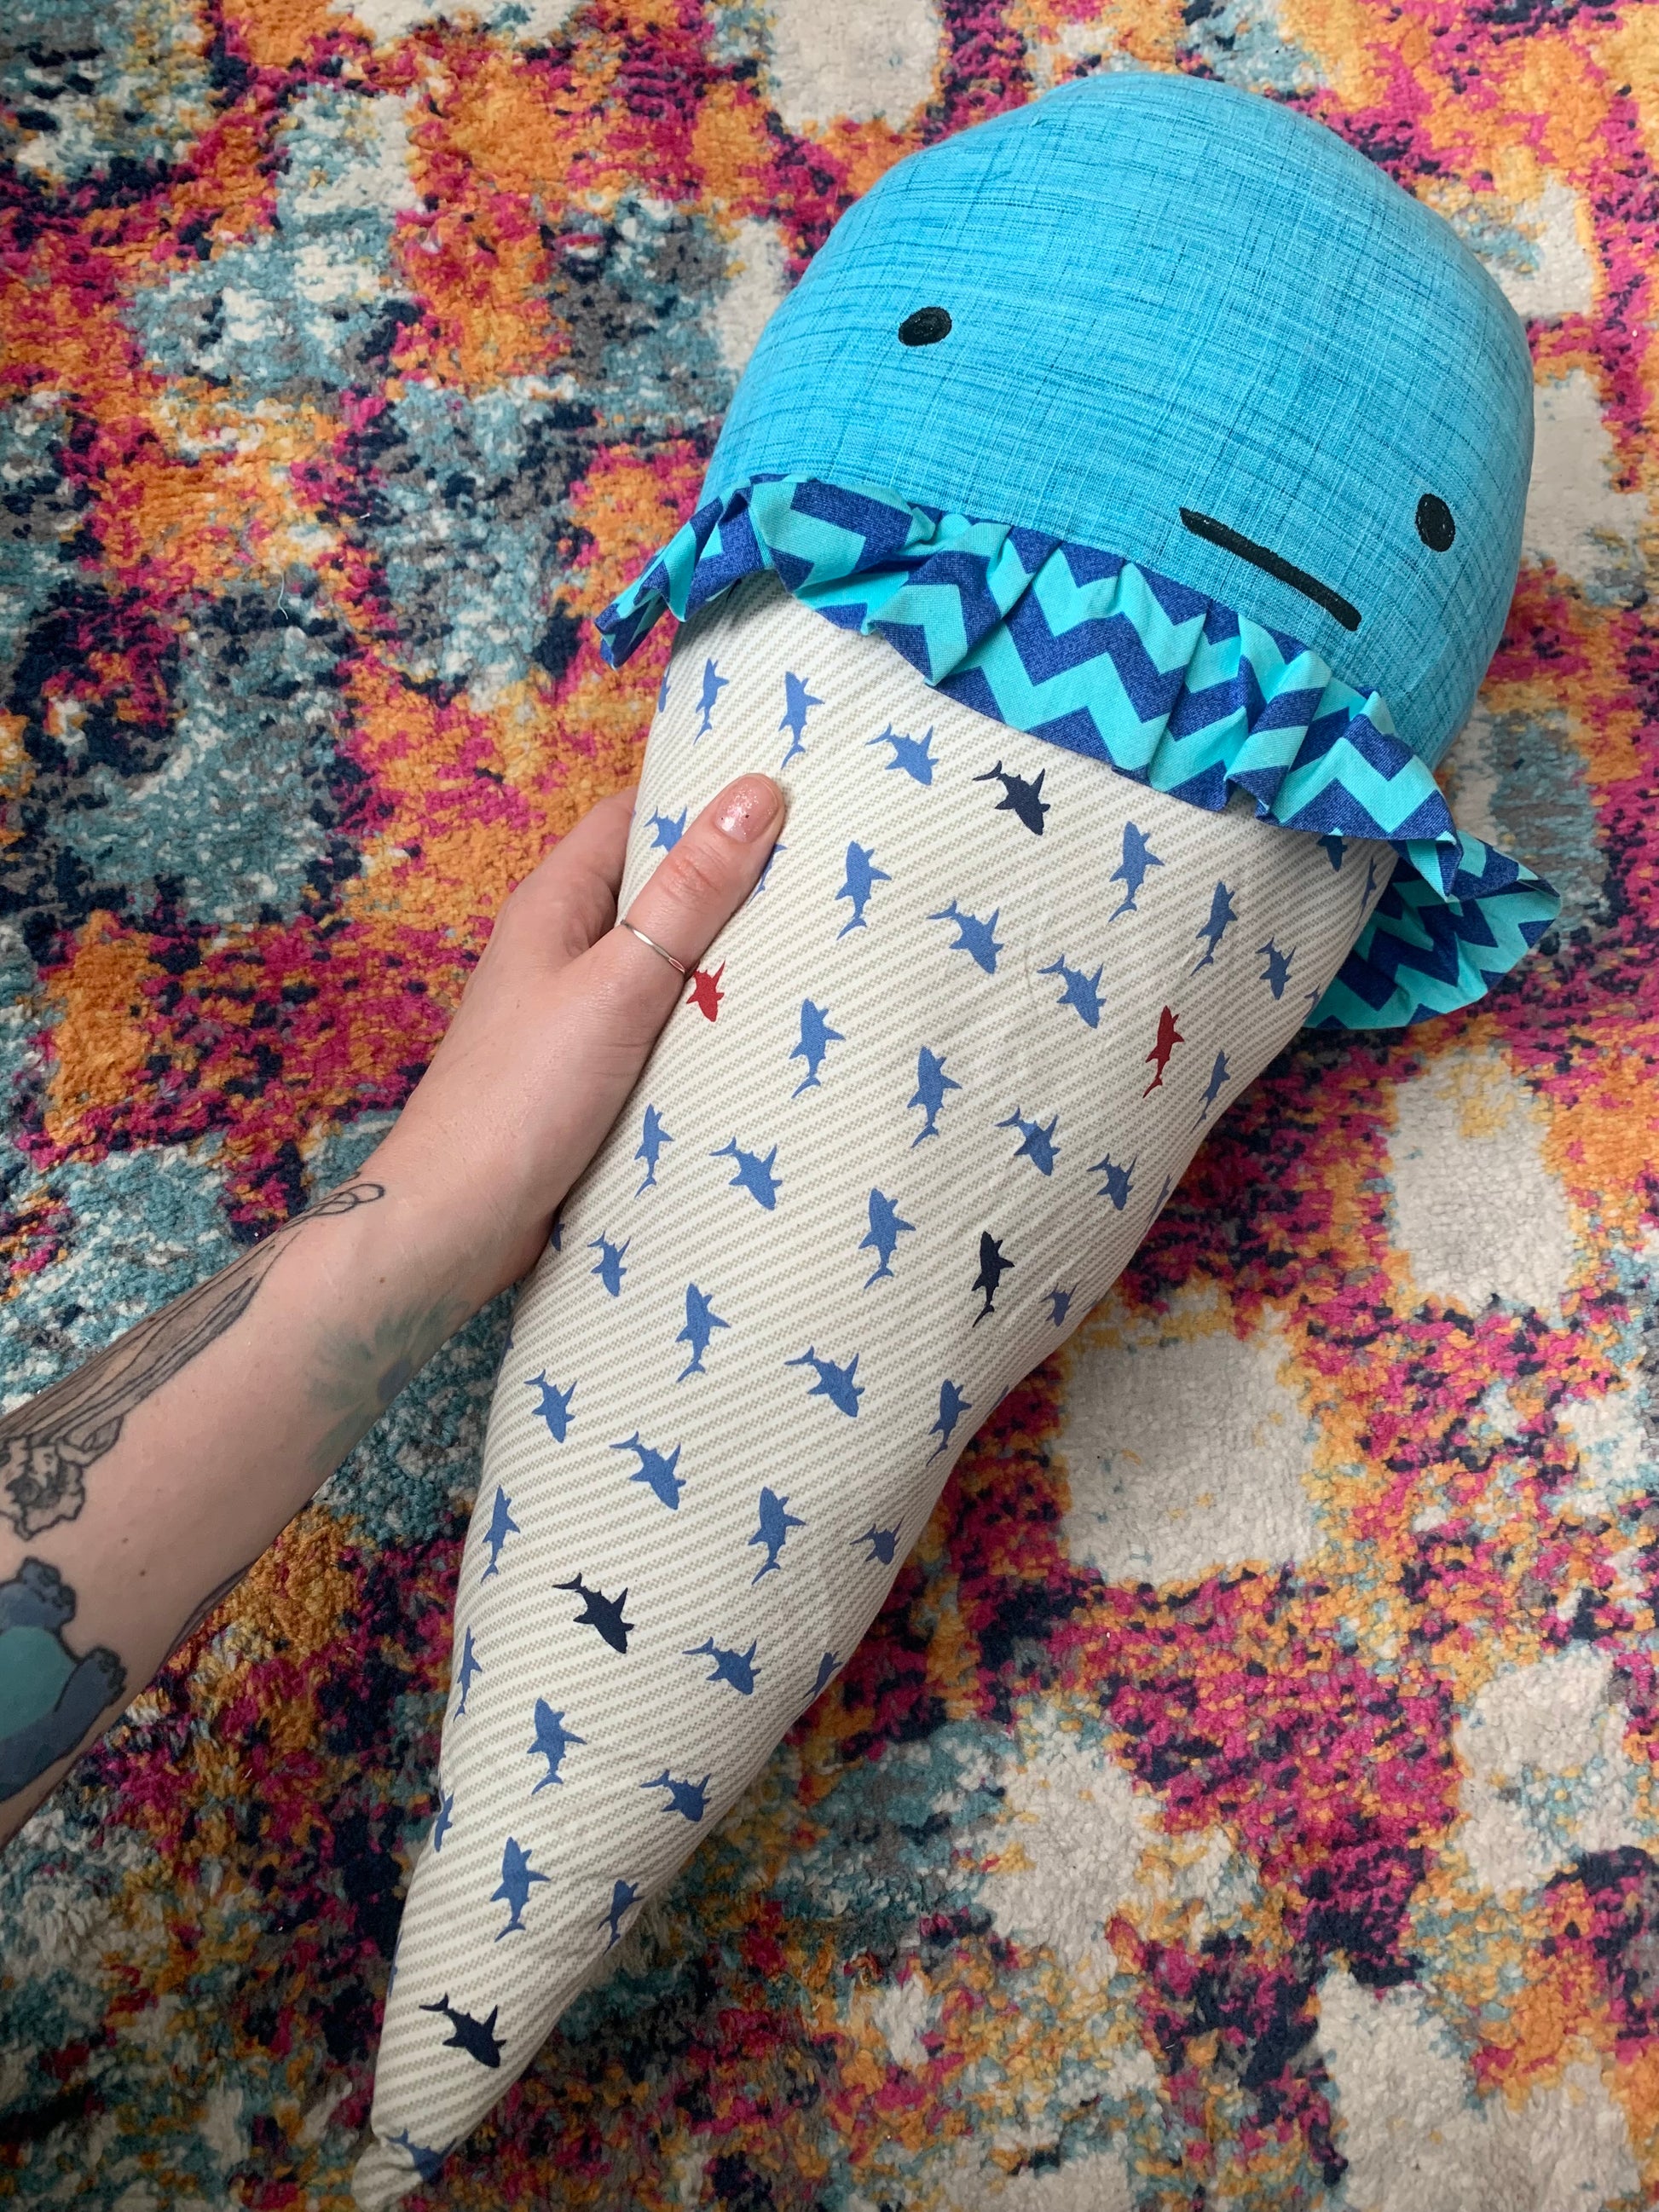 GIANT ice cream cone pillow, with blue ice cream top, an indifferent face, and a shark print cone fabric, held by a hand to the side, for scale